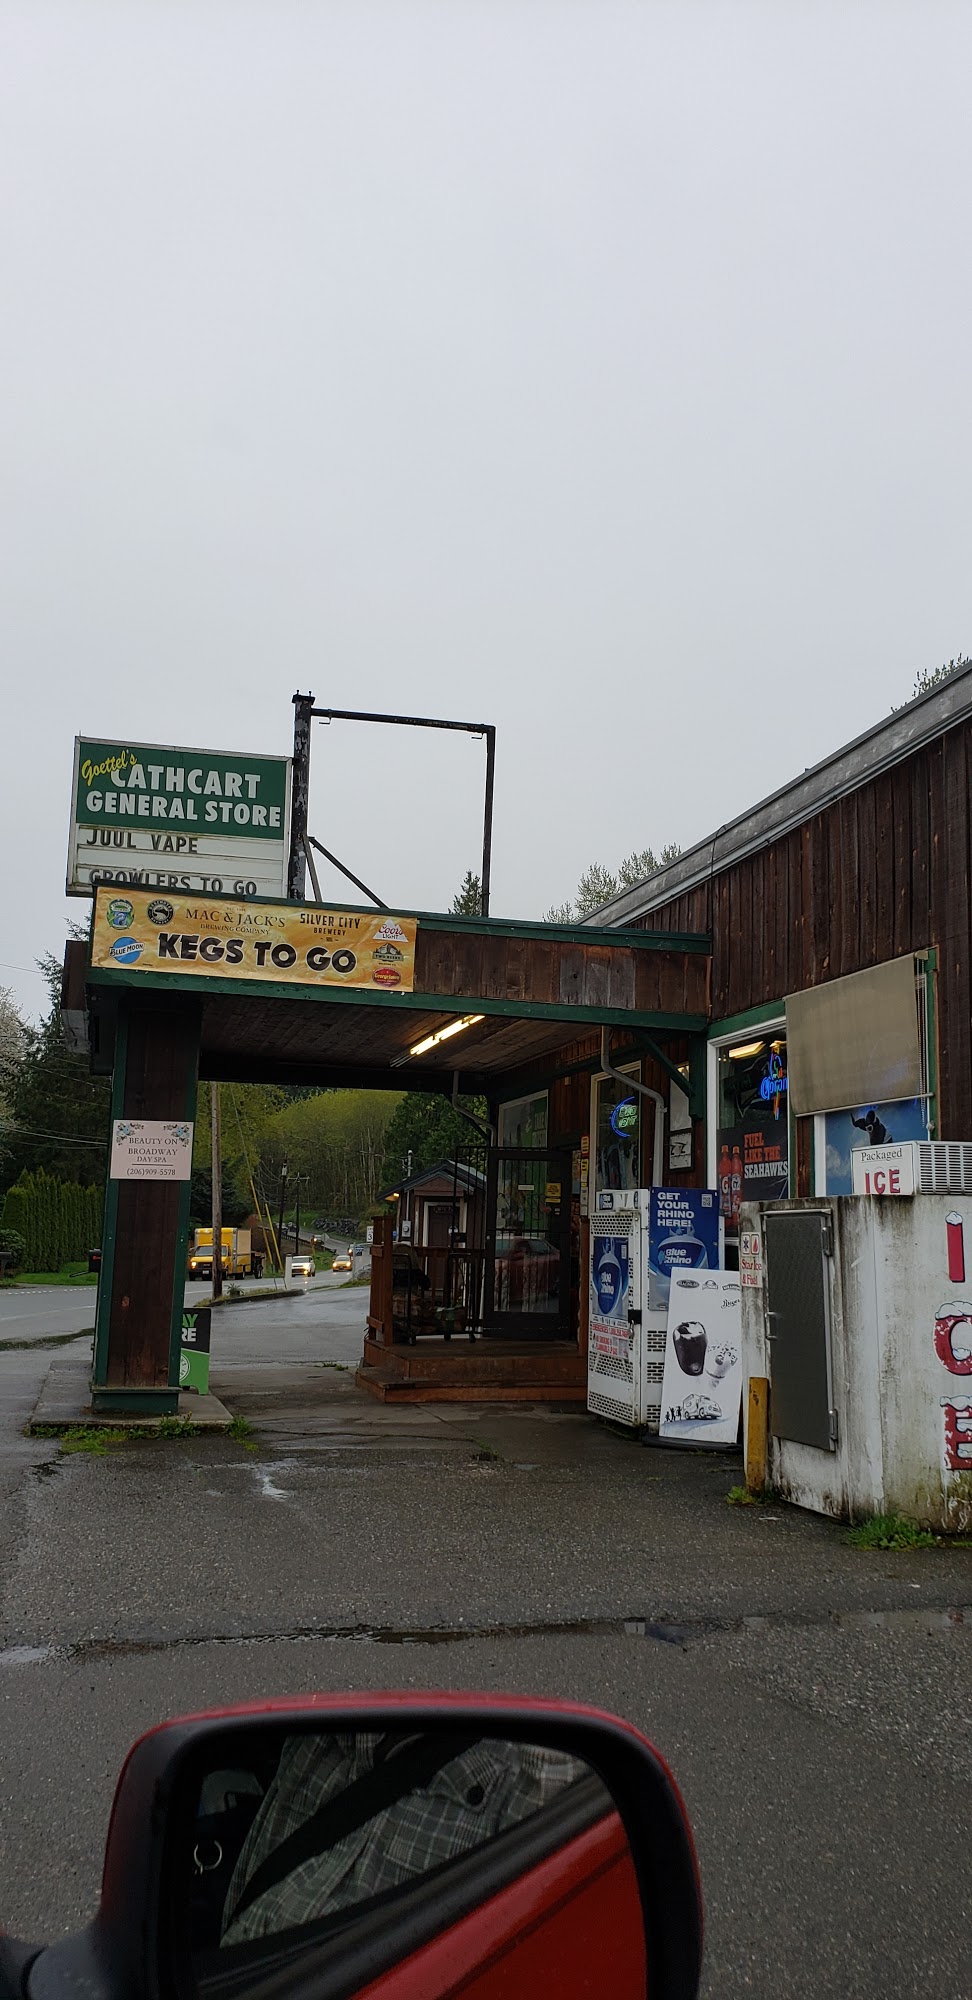 Cathcart General Store